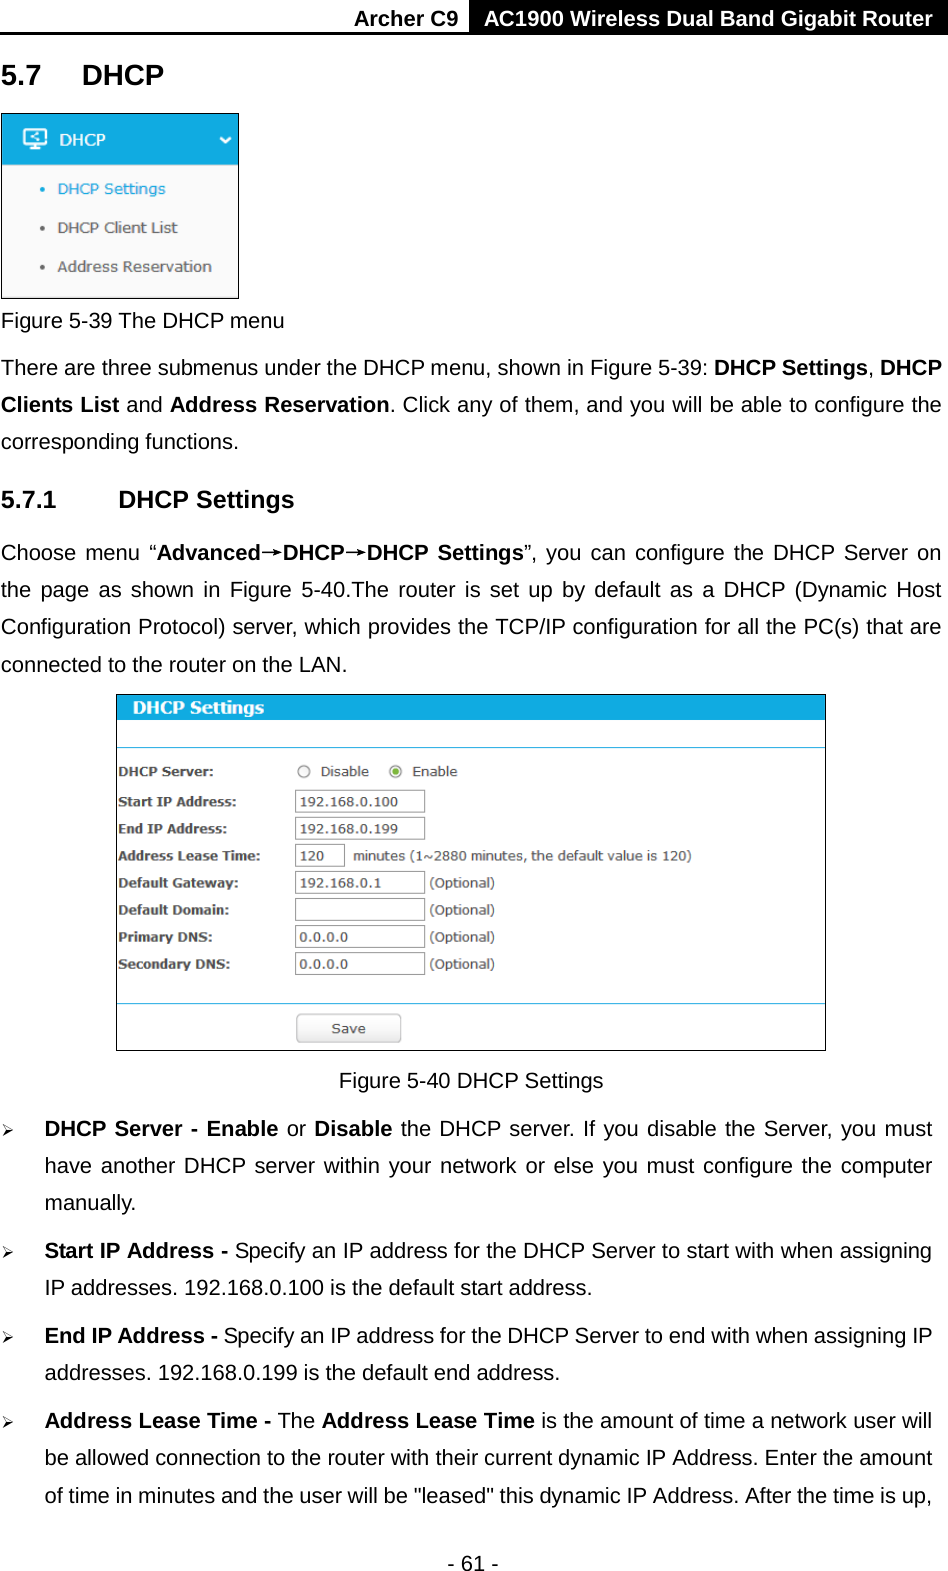 Archer C9 AC1900 Wireless Dual Band Gigabit Router  5.7 DHCP  Figure 5-39 The DHCP menu There are three submenus under the DHCP menu, shown in Figure 5-39: DHCP Settings, DHCP Clients List and Address Reservation. Click any of them, and you will be able to configure the corresponding functions. 5.7.1 DHCP Settings Choose menu “Advanced→DHCP→DHCP Settings”, you can configure the DHCP Server on the page as shown in Figure 5-40.The router is set up by default as a DHCP (Dynamic Host Configuration Protocol) server, which provides the TCP/IP configuration for all the PC(s) that are connected to the router on the LAN.    Figure 5-40 DHCP Settings  DHCP Server - Enable or Disable the DHCP server. If you disable the Server, you must have another DHCP server within your network or else you must configure the computer manually.  Start IP Address - Specify an IP address for the DHCP Server to start with when assigning IP addresses. 192.168.0.100 is the default start address.  End IP Address - Specify an IP address for the DHCP Server to end with when assigning IP addresses. 192.168.0.199 is the default end address.  Address Lease Time - The Address Lease Time is the amount of time a network user will be allowed connection to the router with their current dynamic IP Address. Enter the amount of time in minutes and the user will be &quot;leased&quot; this dynamic IP Address. After the time is up, - 61 - 